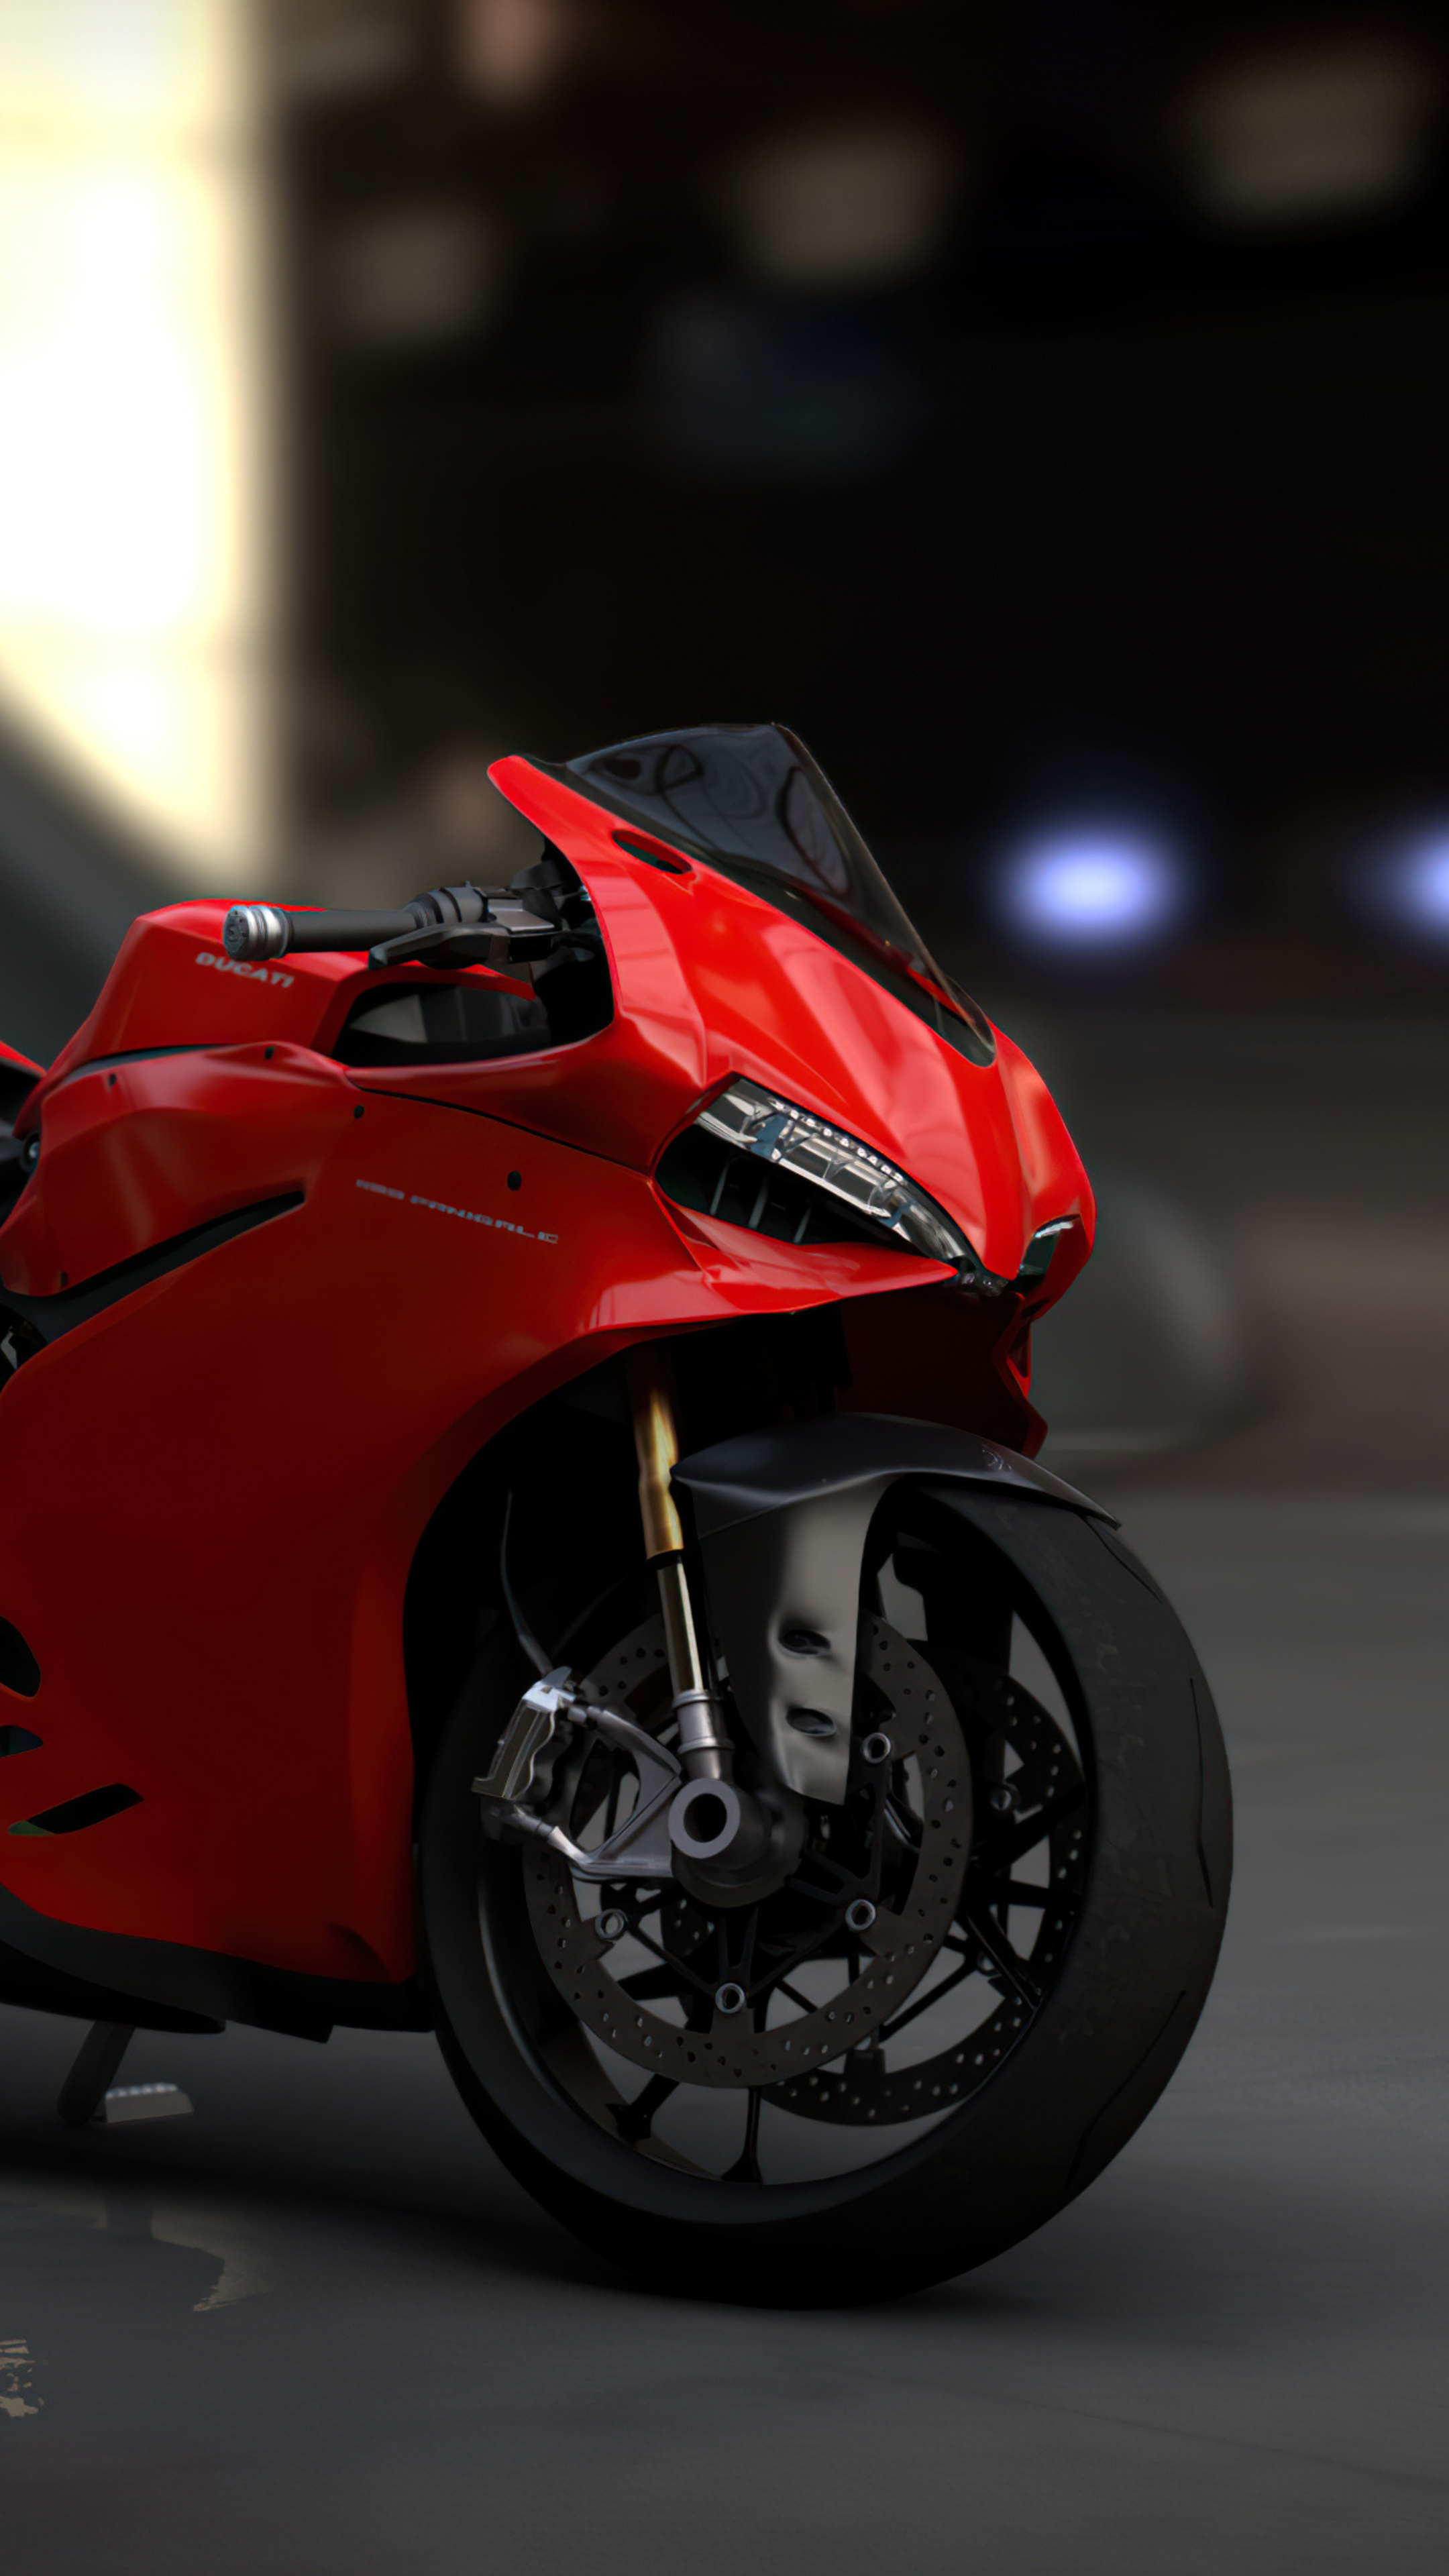 2160x3840 Ducati Panigale 1199 4k Sony Xperia X,XZ,Z5 Premium HD 4k  Wallpapers, Images, Backgrounds, Photos and Pictures